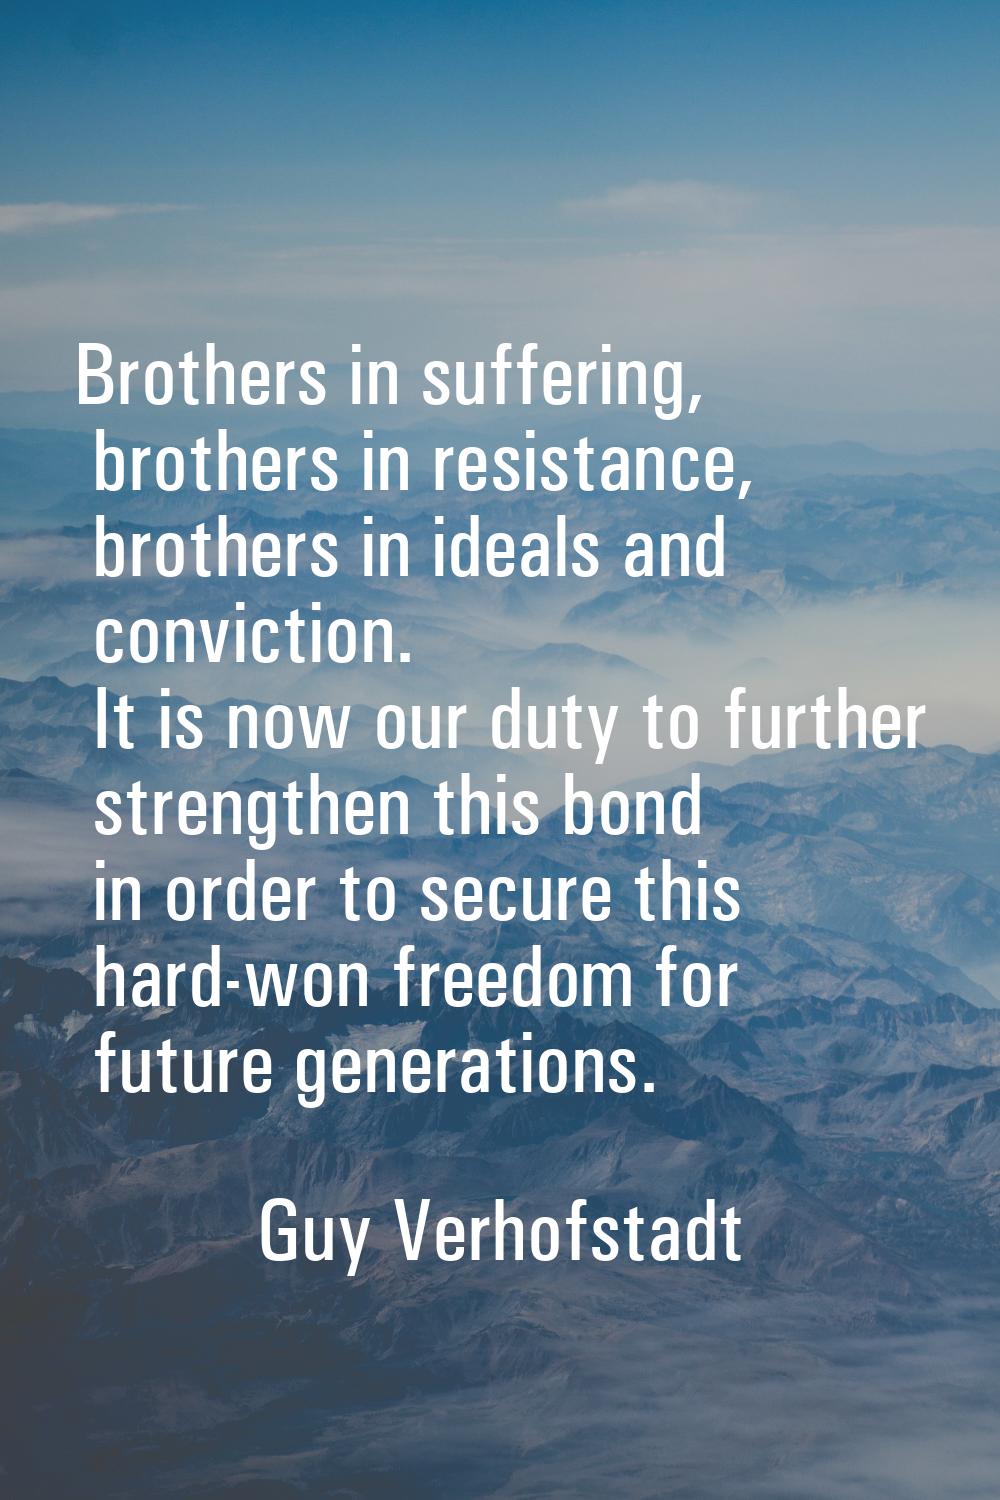 Brothers in suffering, brothers in resistance, brothers in ideals and conviction. It is now our dut